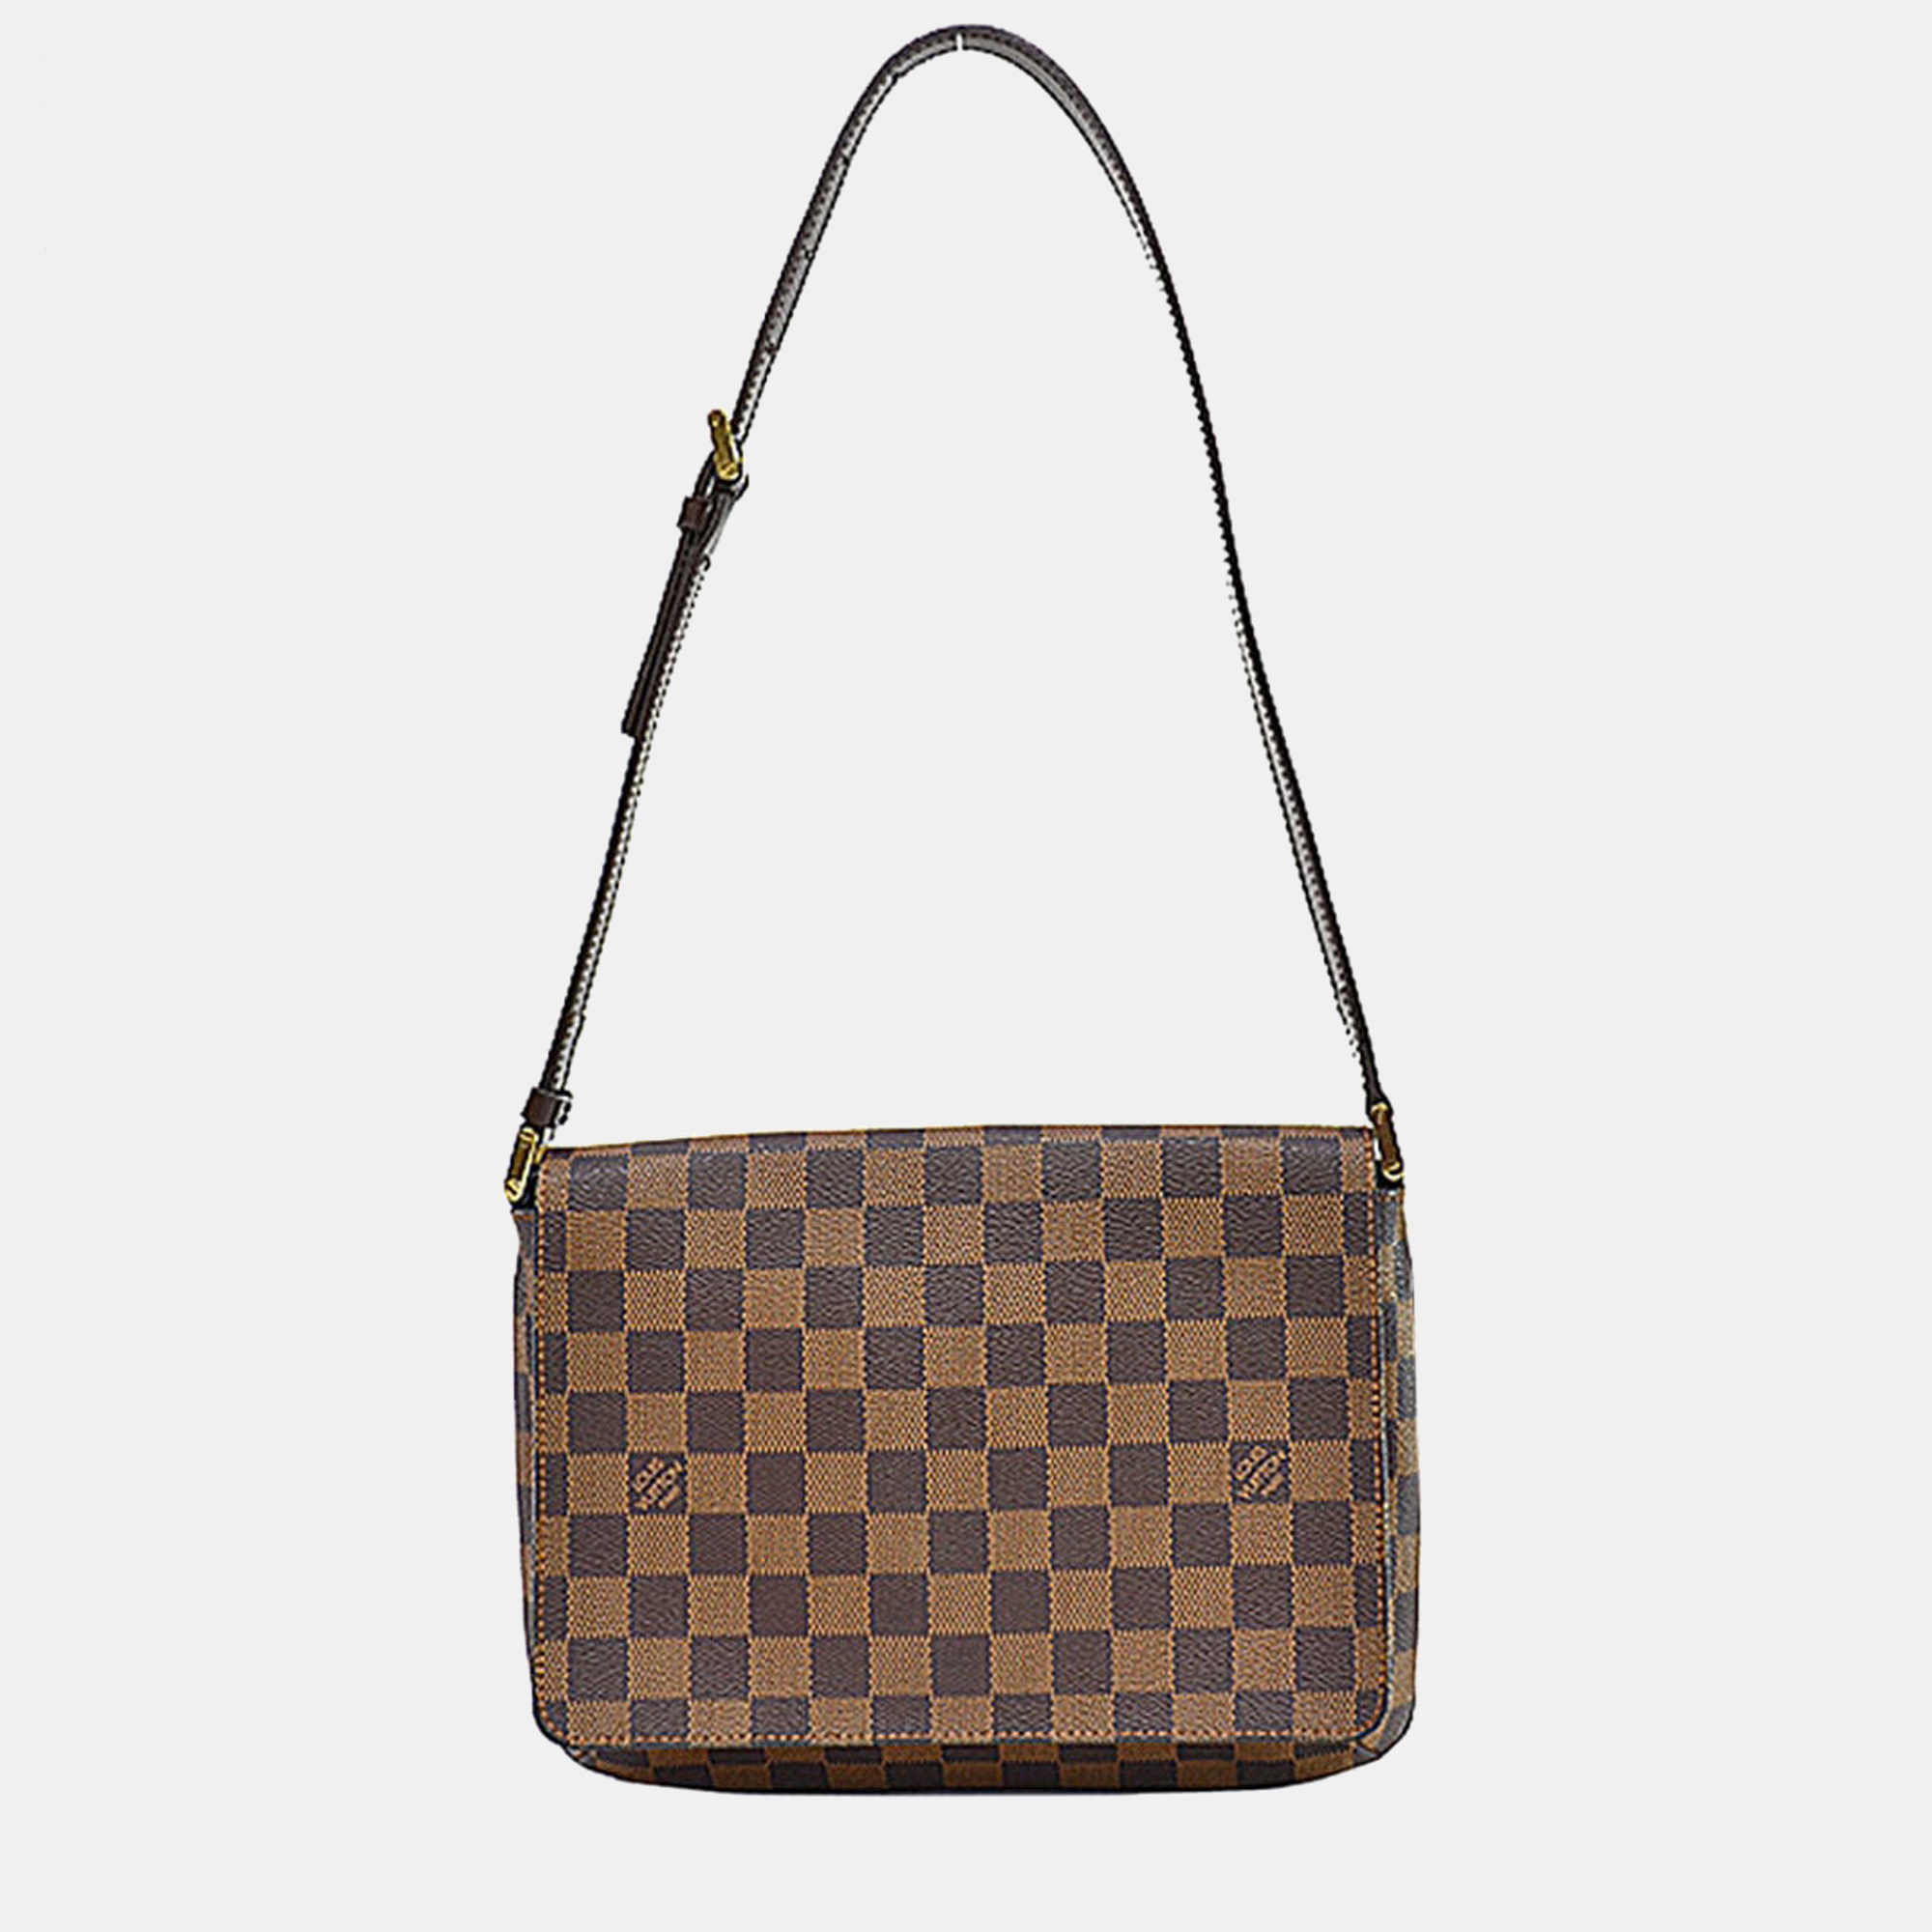 Louis Vuitton ensures you have a wonderful accessory to accompany you every day with this well crafted bag. It has a signature look and a practical size.